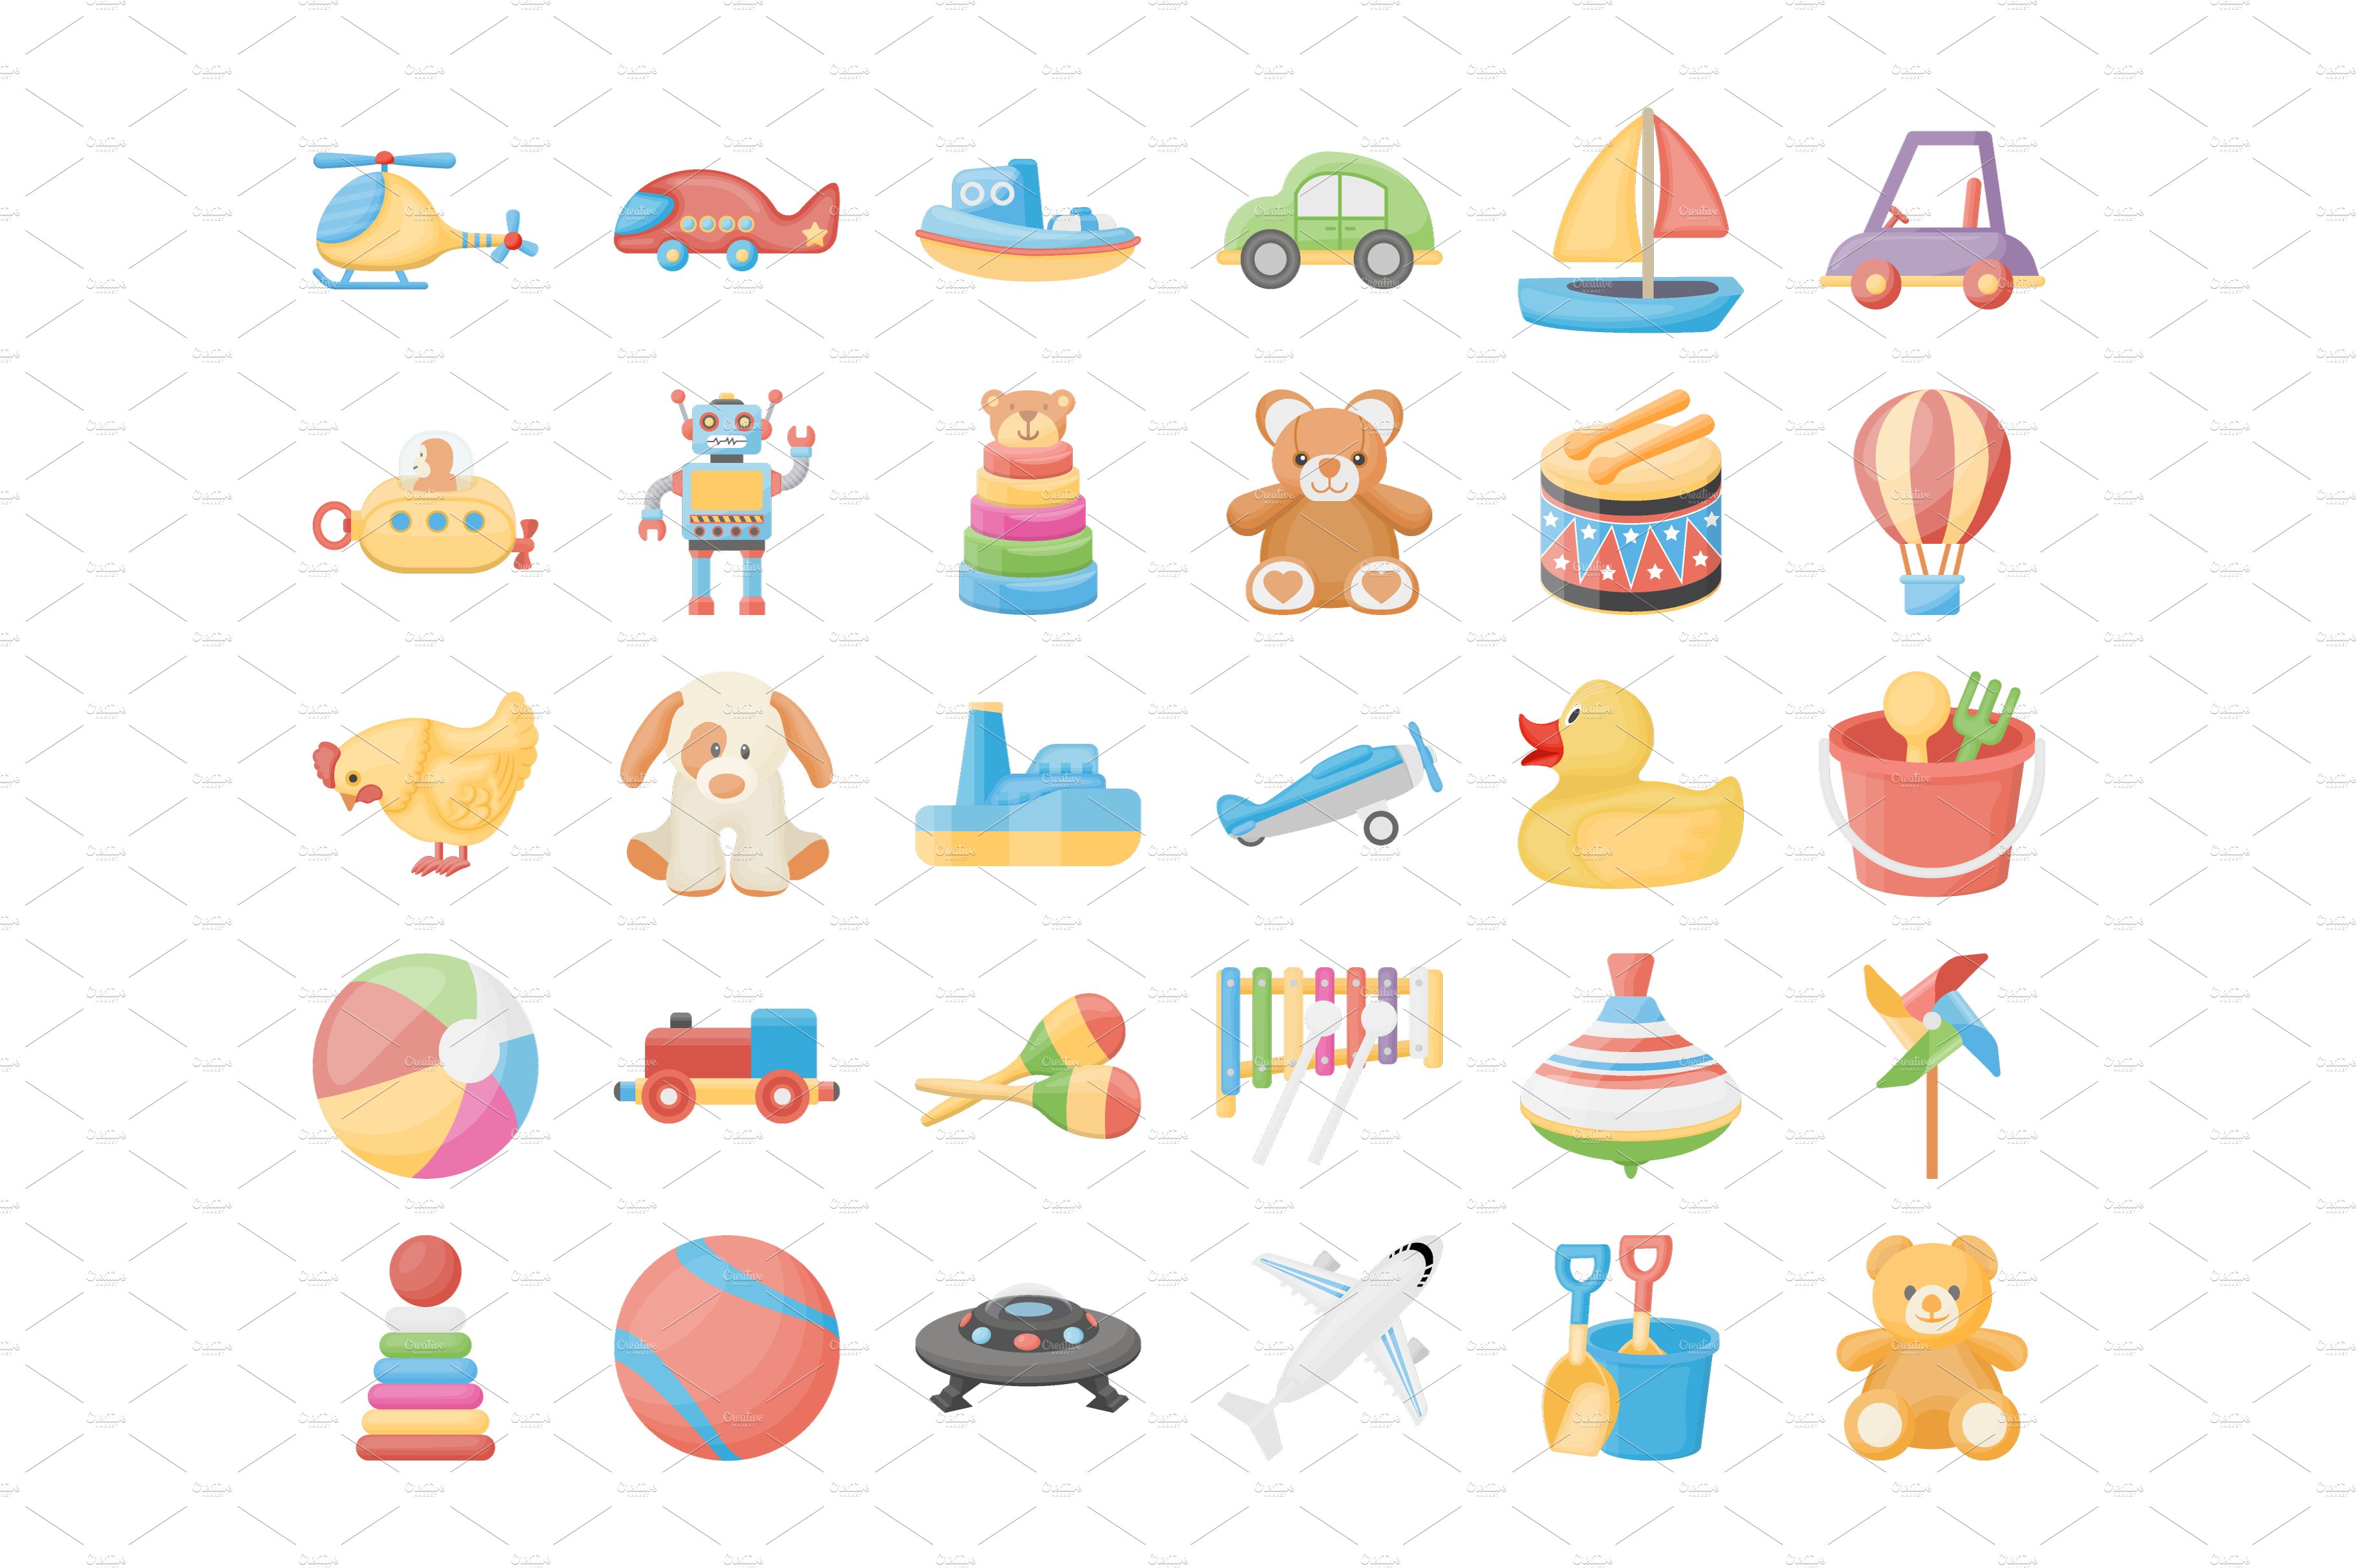 60 Toys Vector Icons cover image.